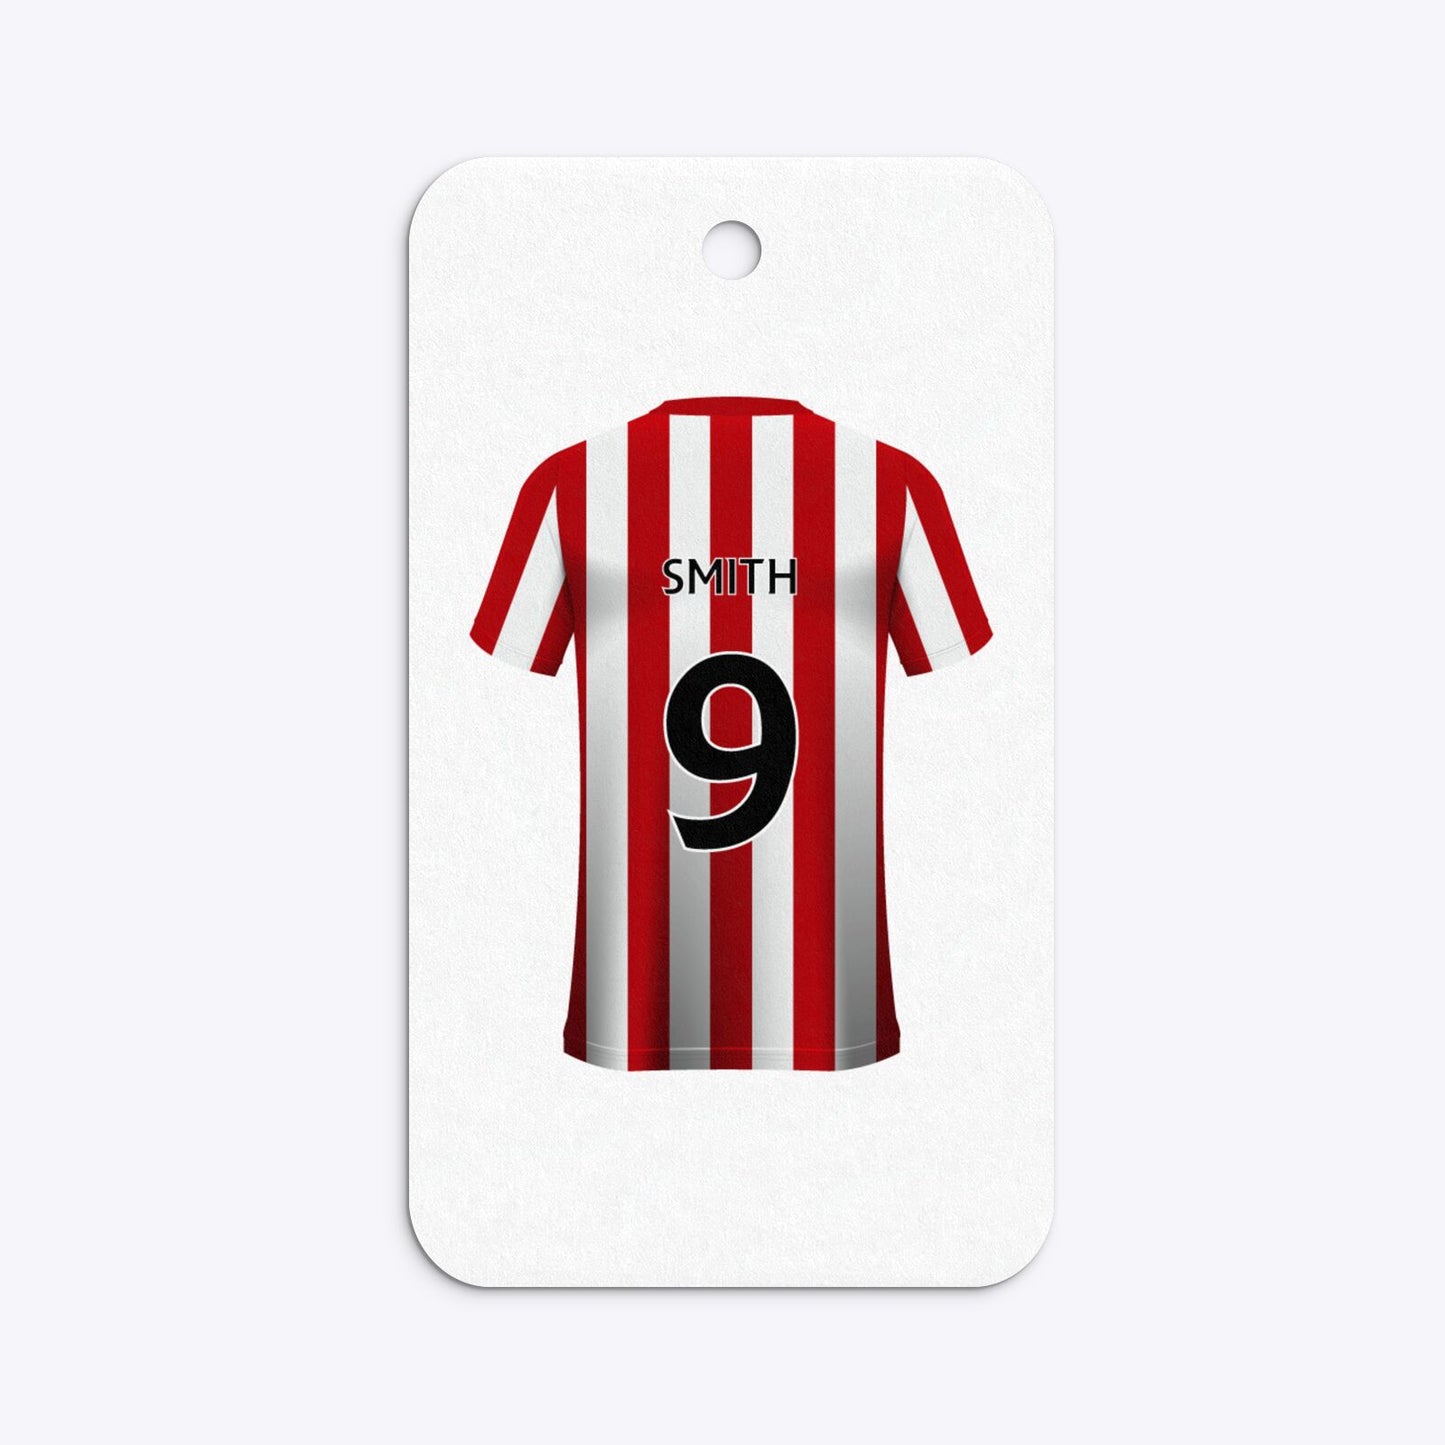 Red White Striped Personalised Football Shirt Rounded Rectangle Gift Tag